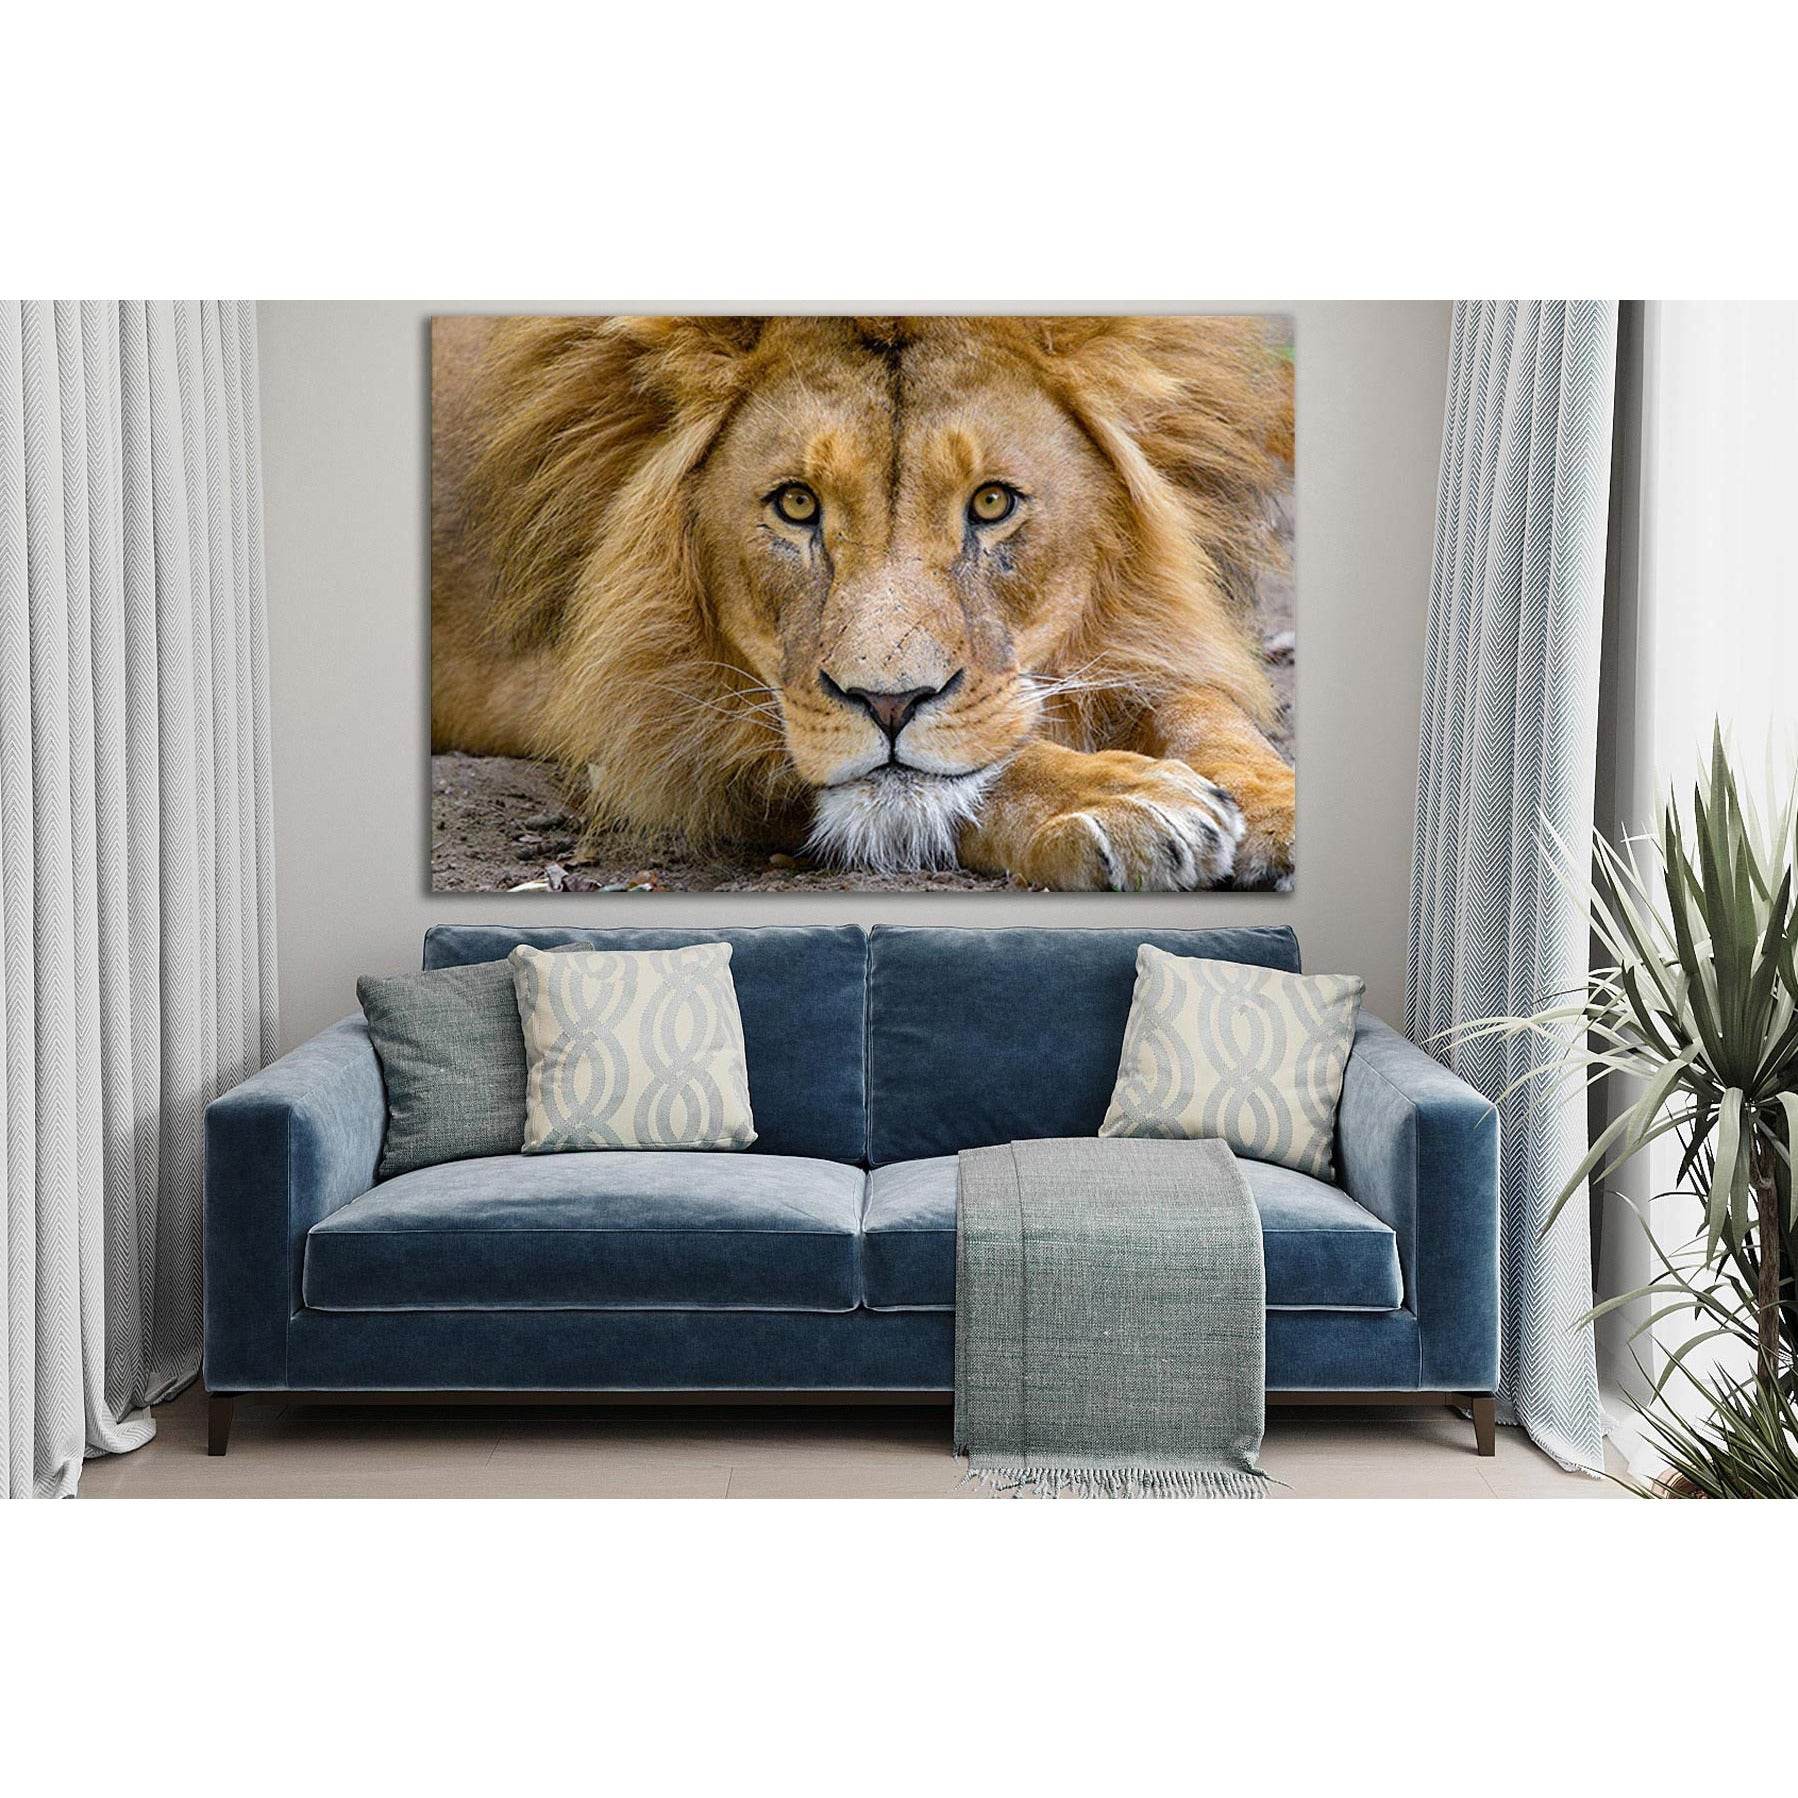 Lion King Of Beasts №SL1529 Ready to Hang Canvas Print